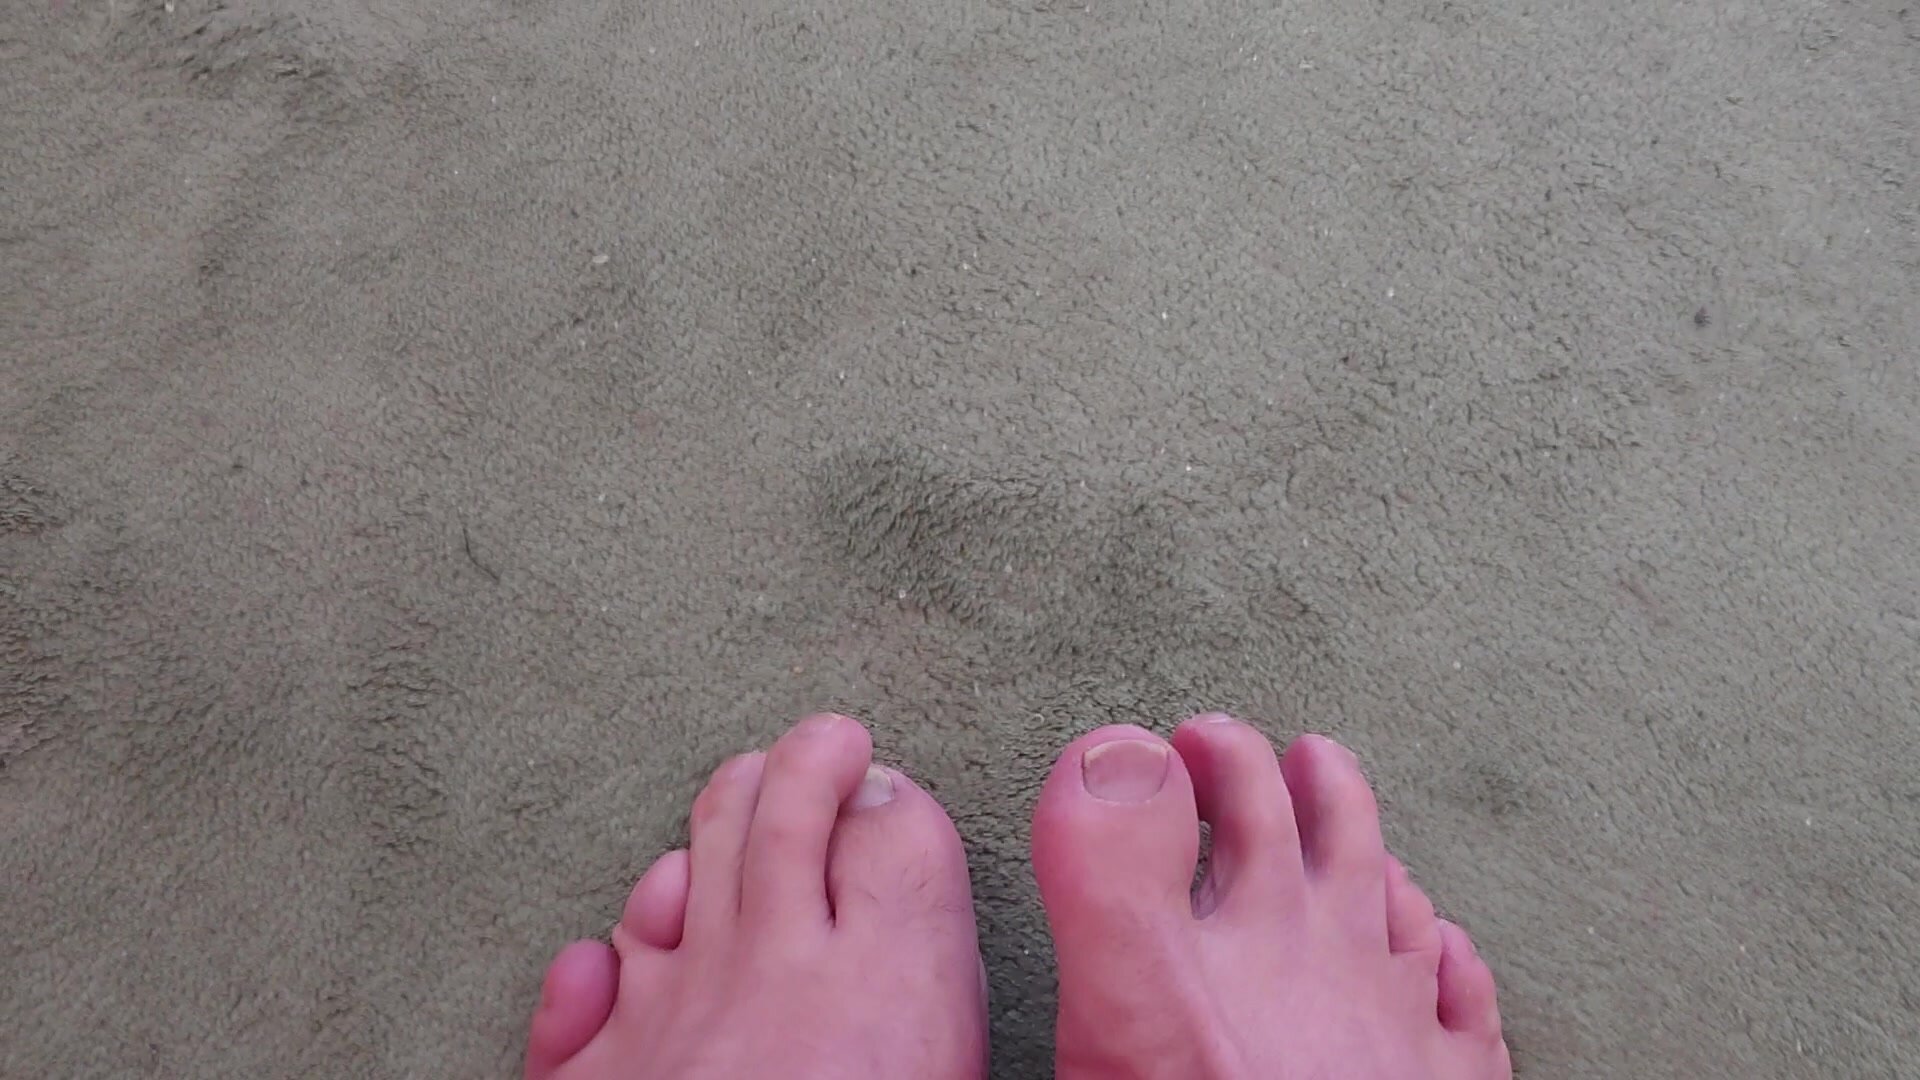 Please comment my deformed toes